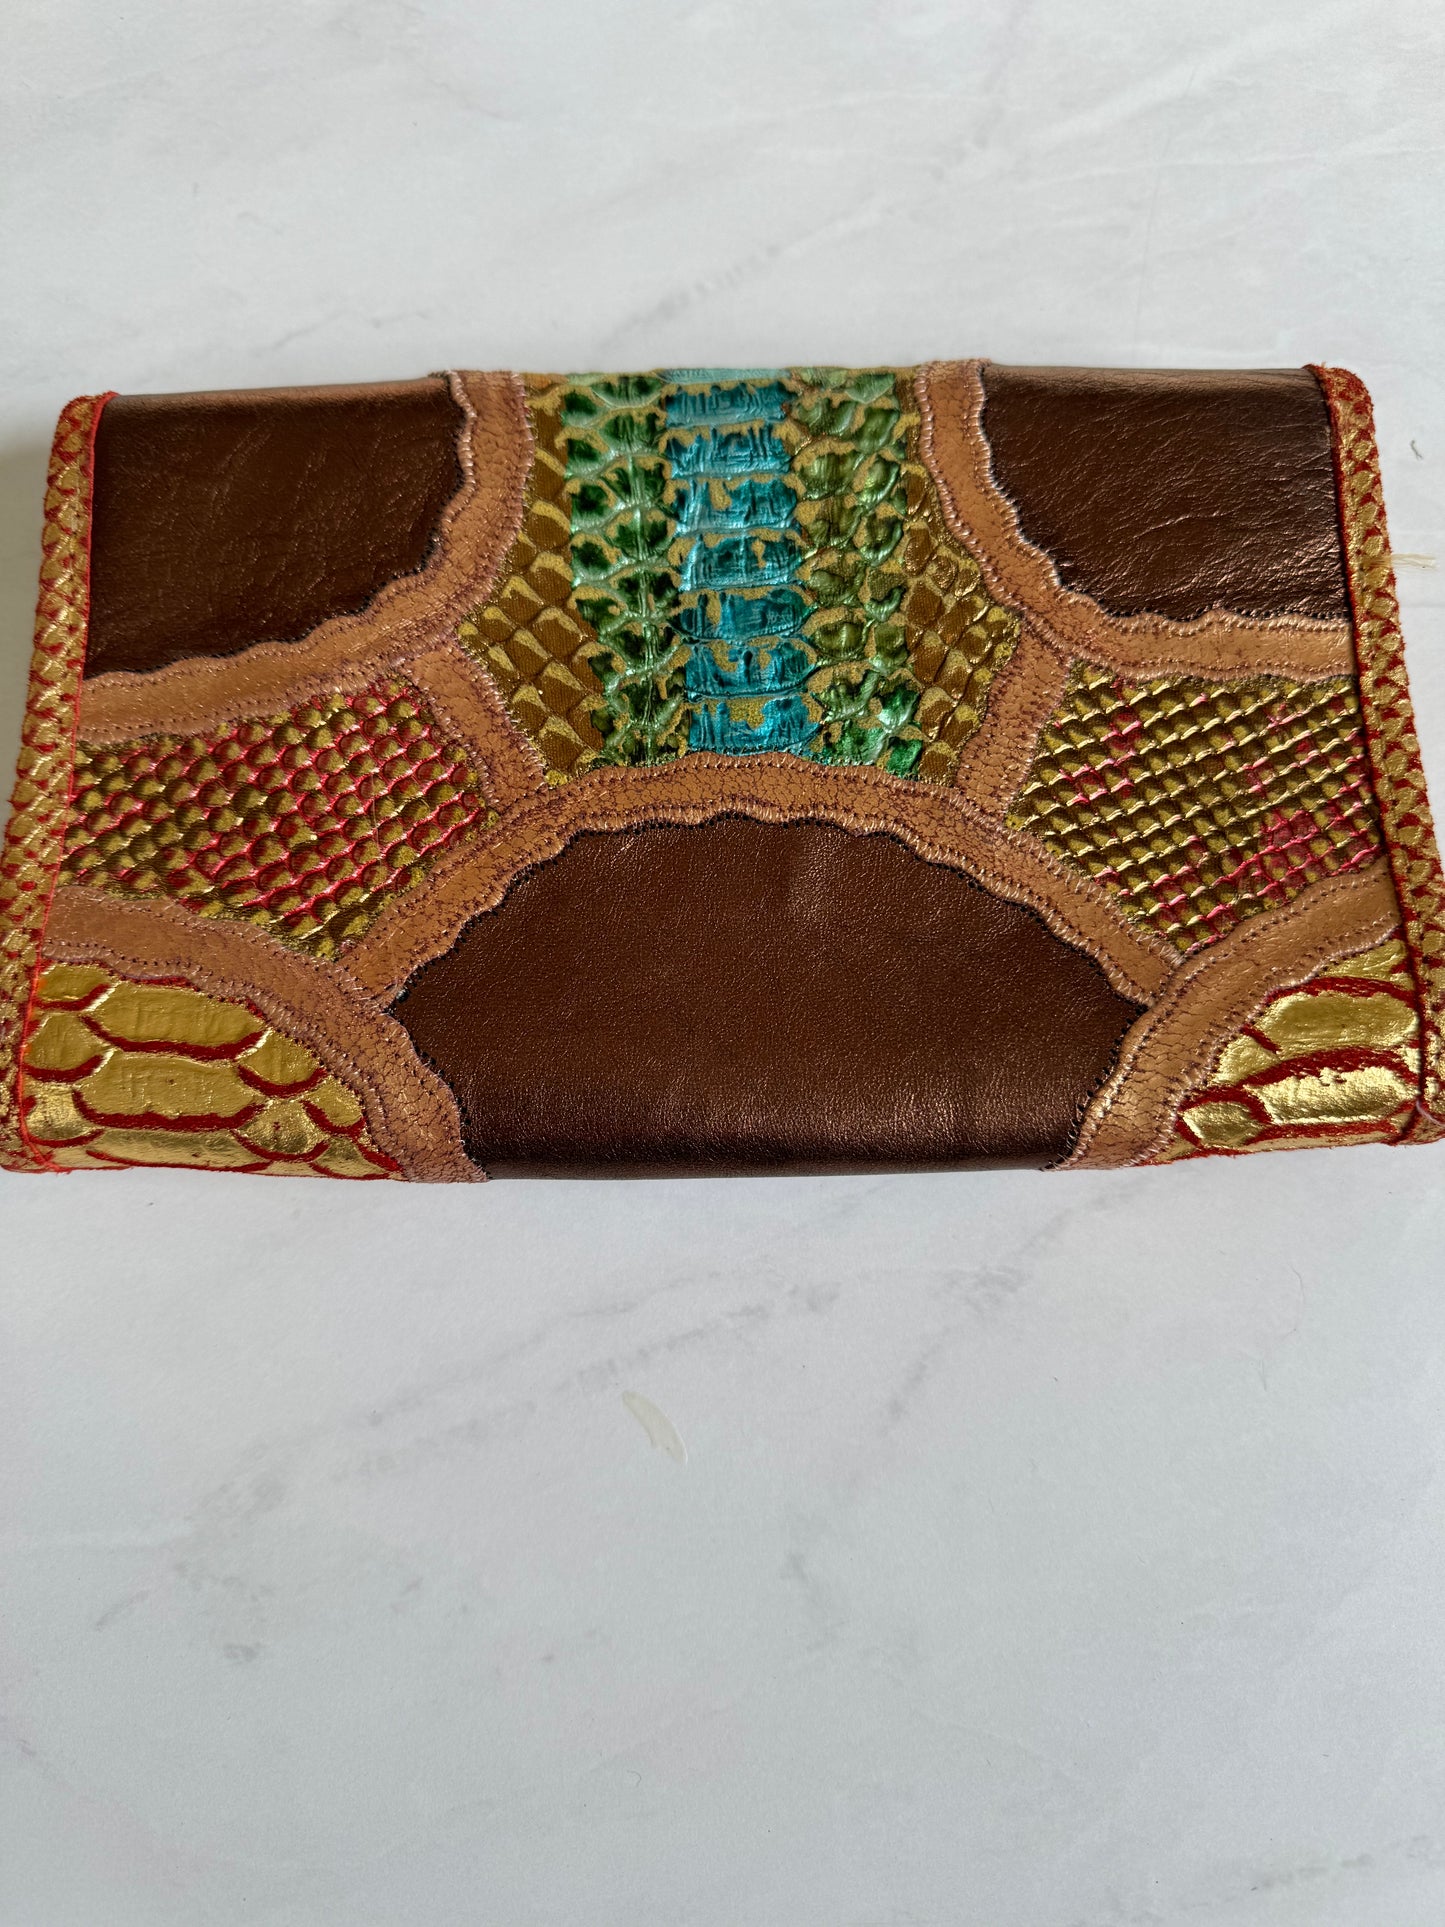 Gorgeous vintage Carlos Falchi clutch with iridescent snake print and bronze colorway